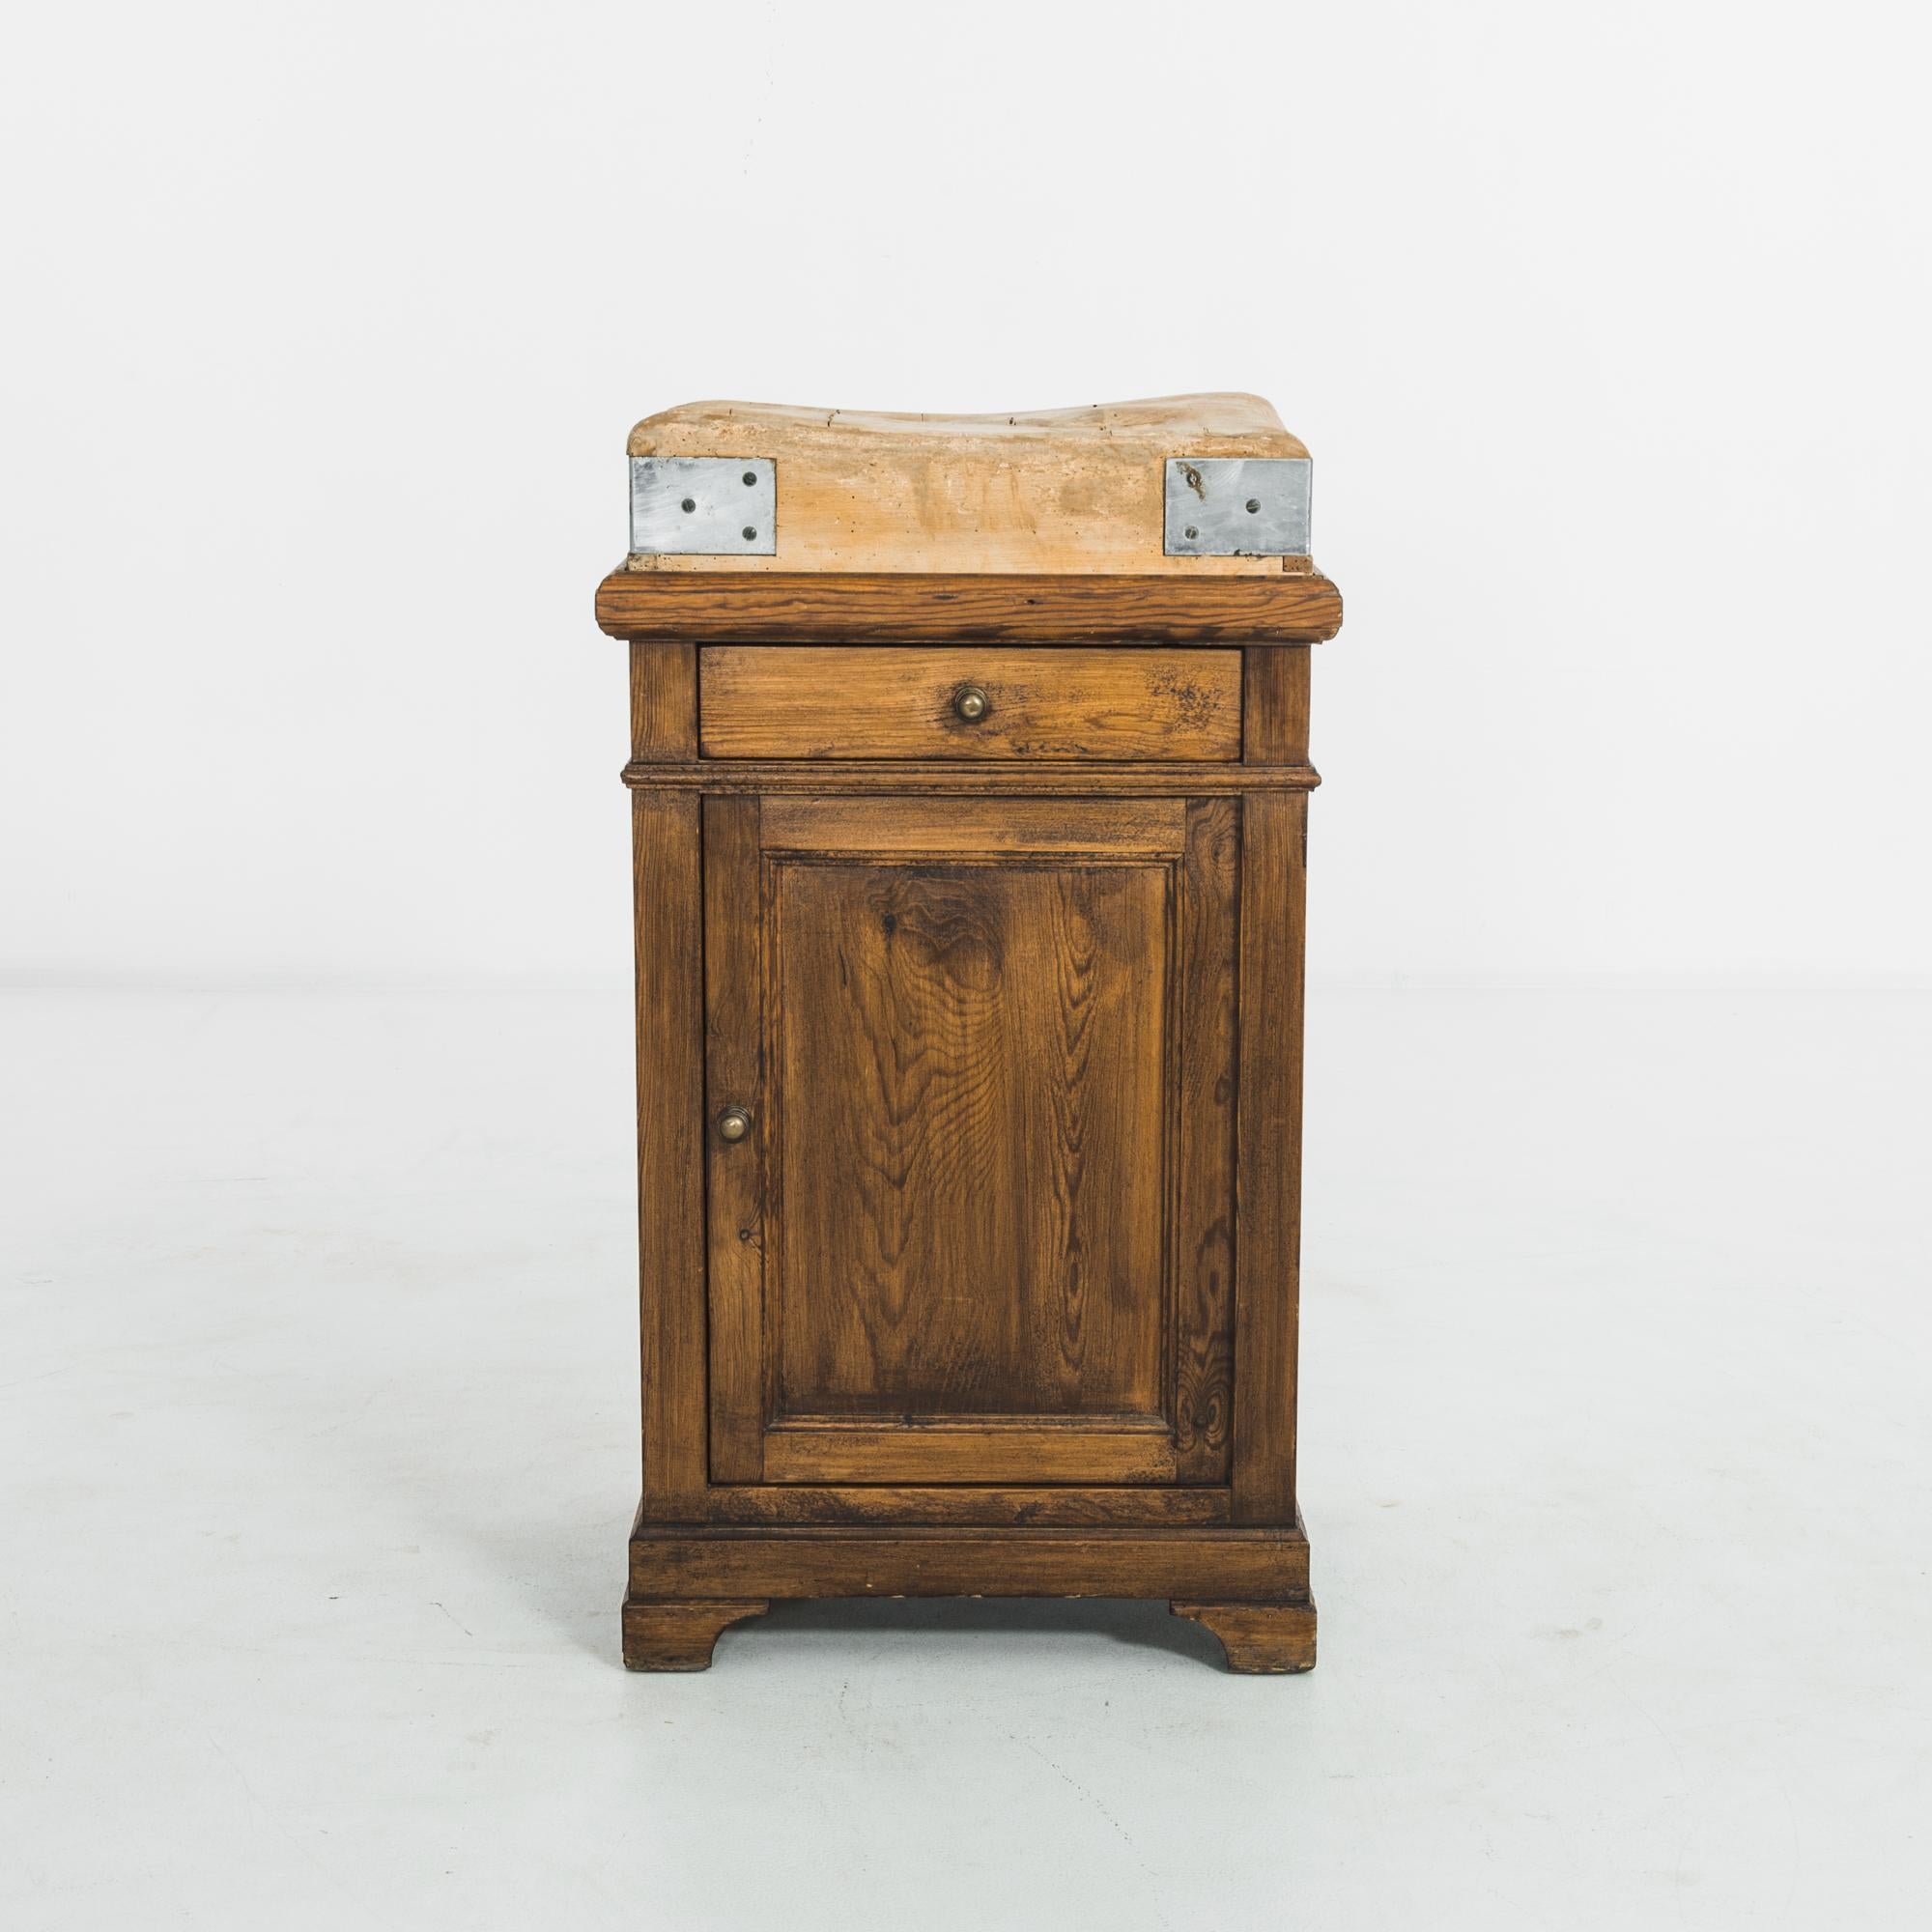 This wooden worktable was made in Belgium, circa 1930. Elevated on bracket feet, the rectangular table houses a drawer and a compartment with two shelves. It features round pulls and a smooth patina highlighting the curves of the wood grain. The top